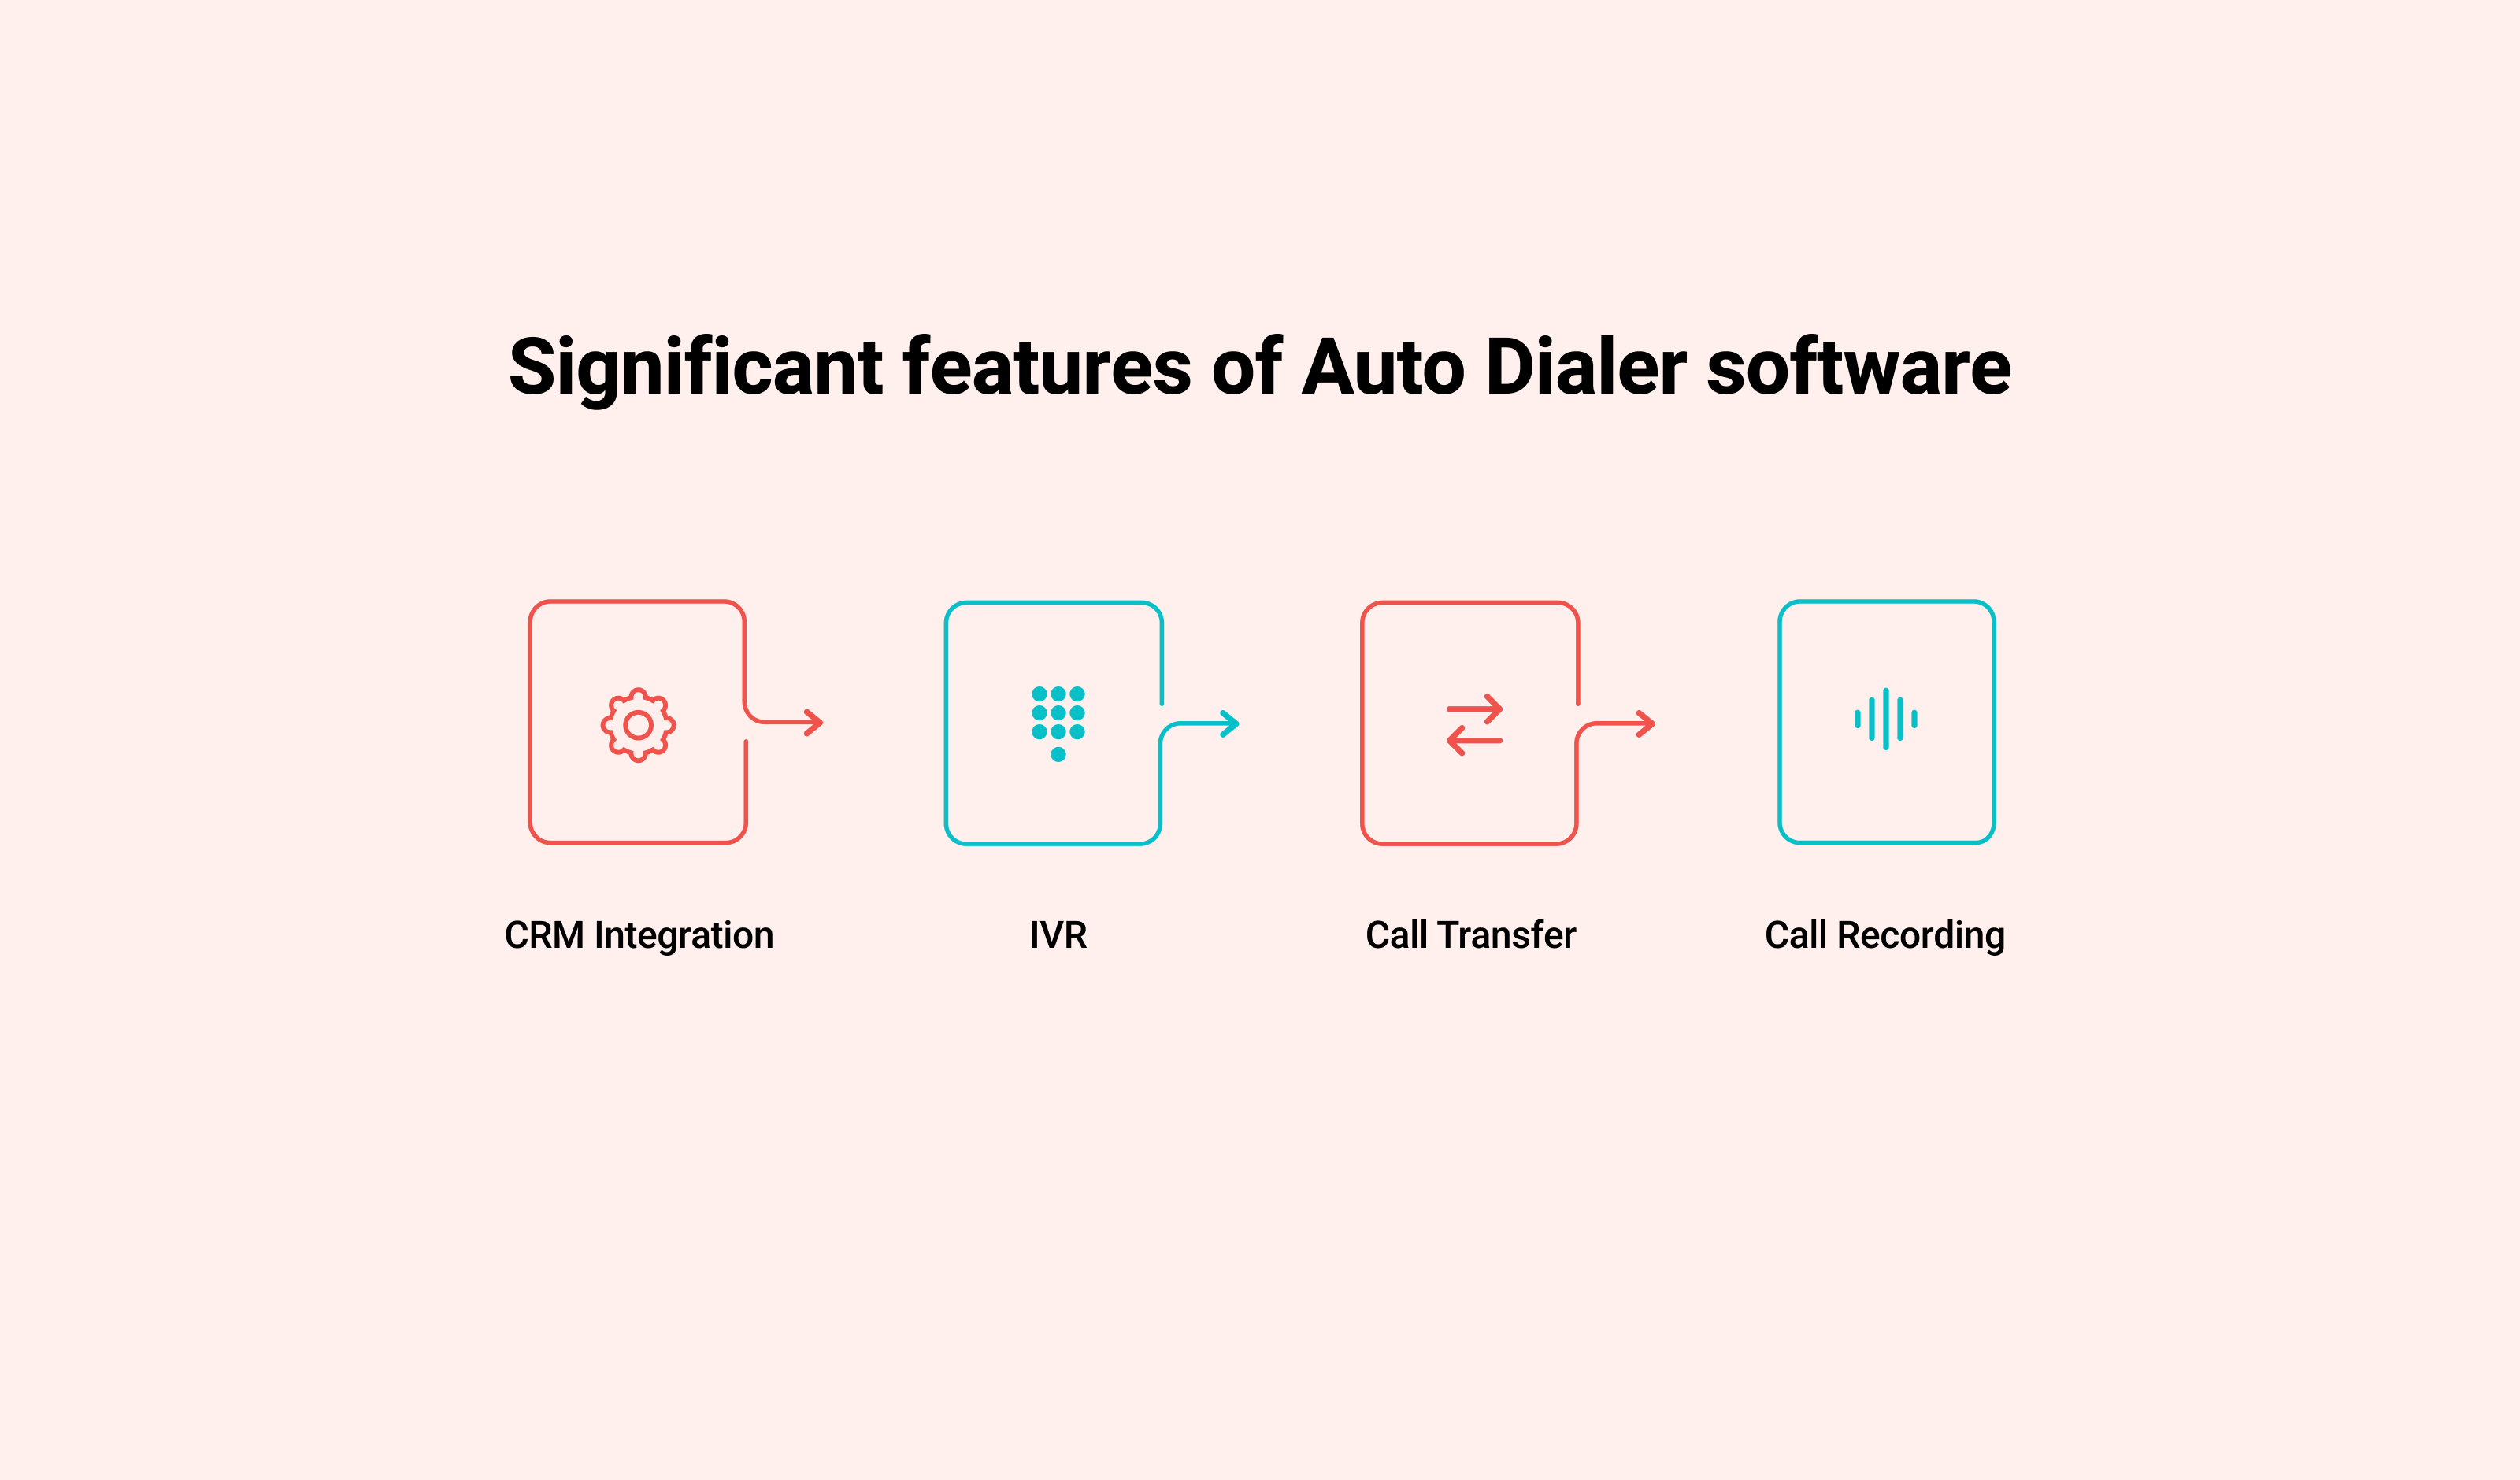  Significant features of Auto Dialer software: